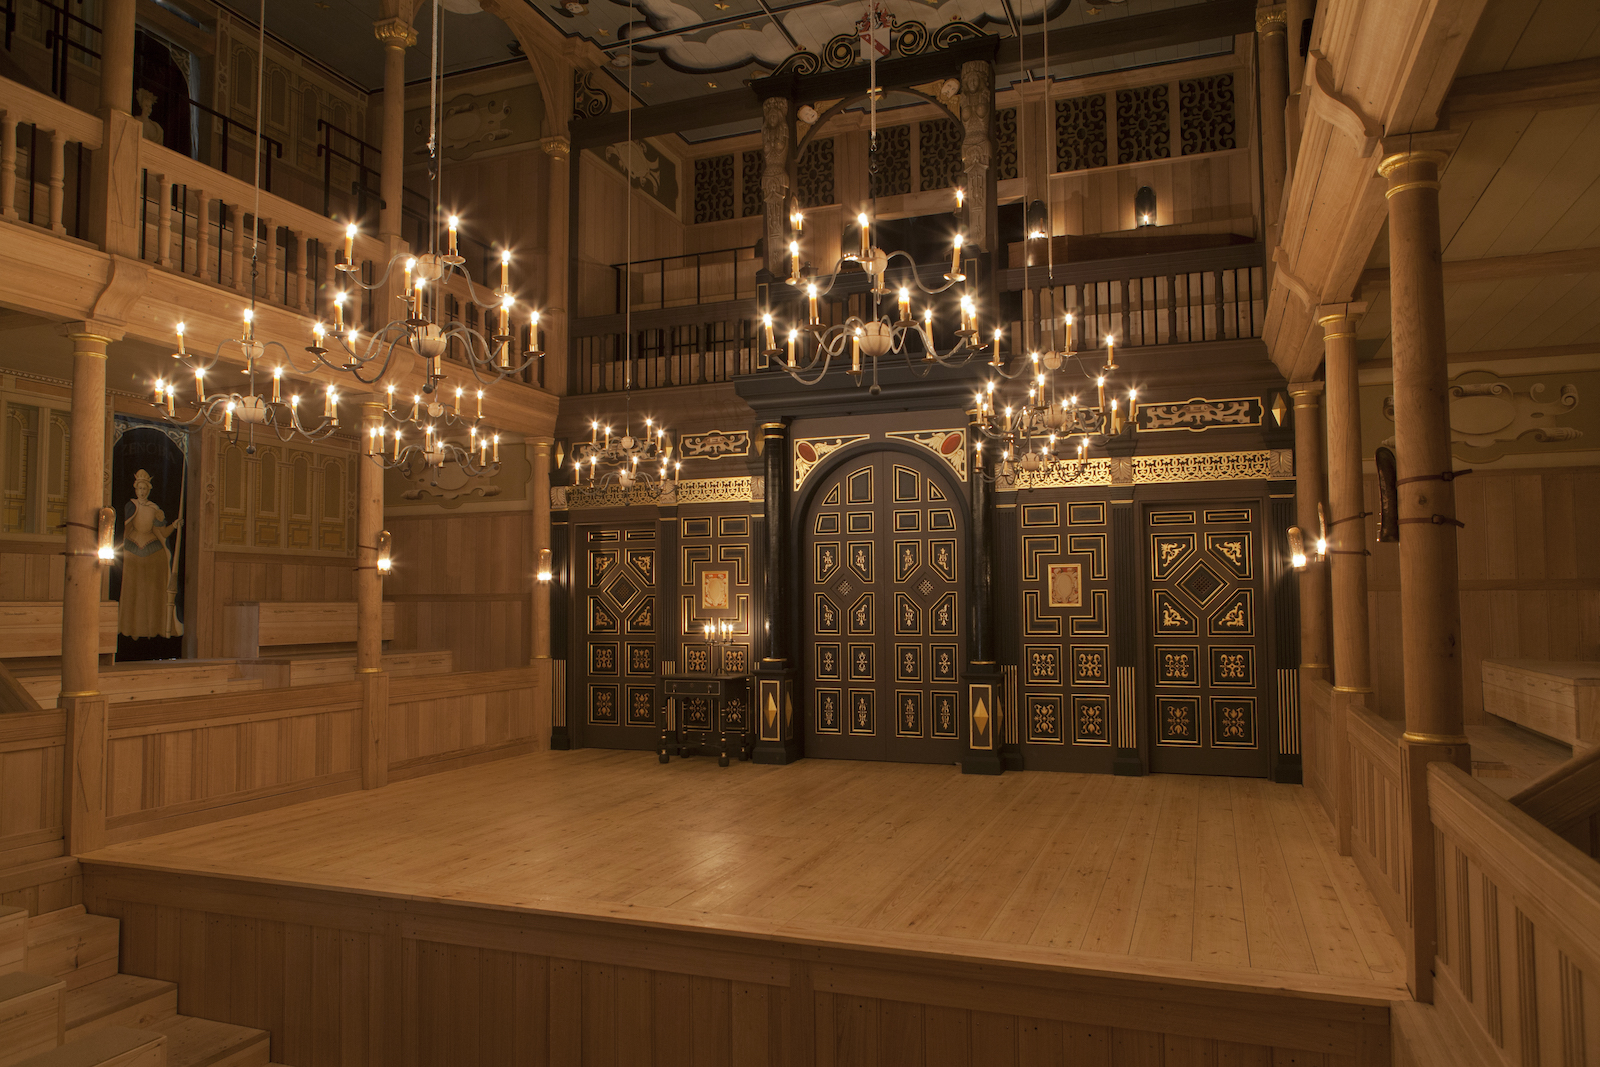 An indoor wooden playhouse lit by candles